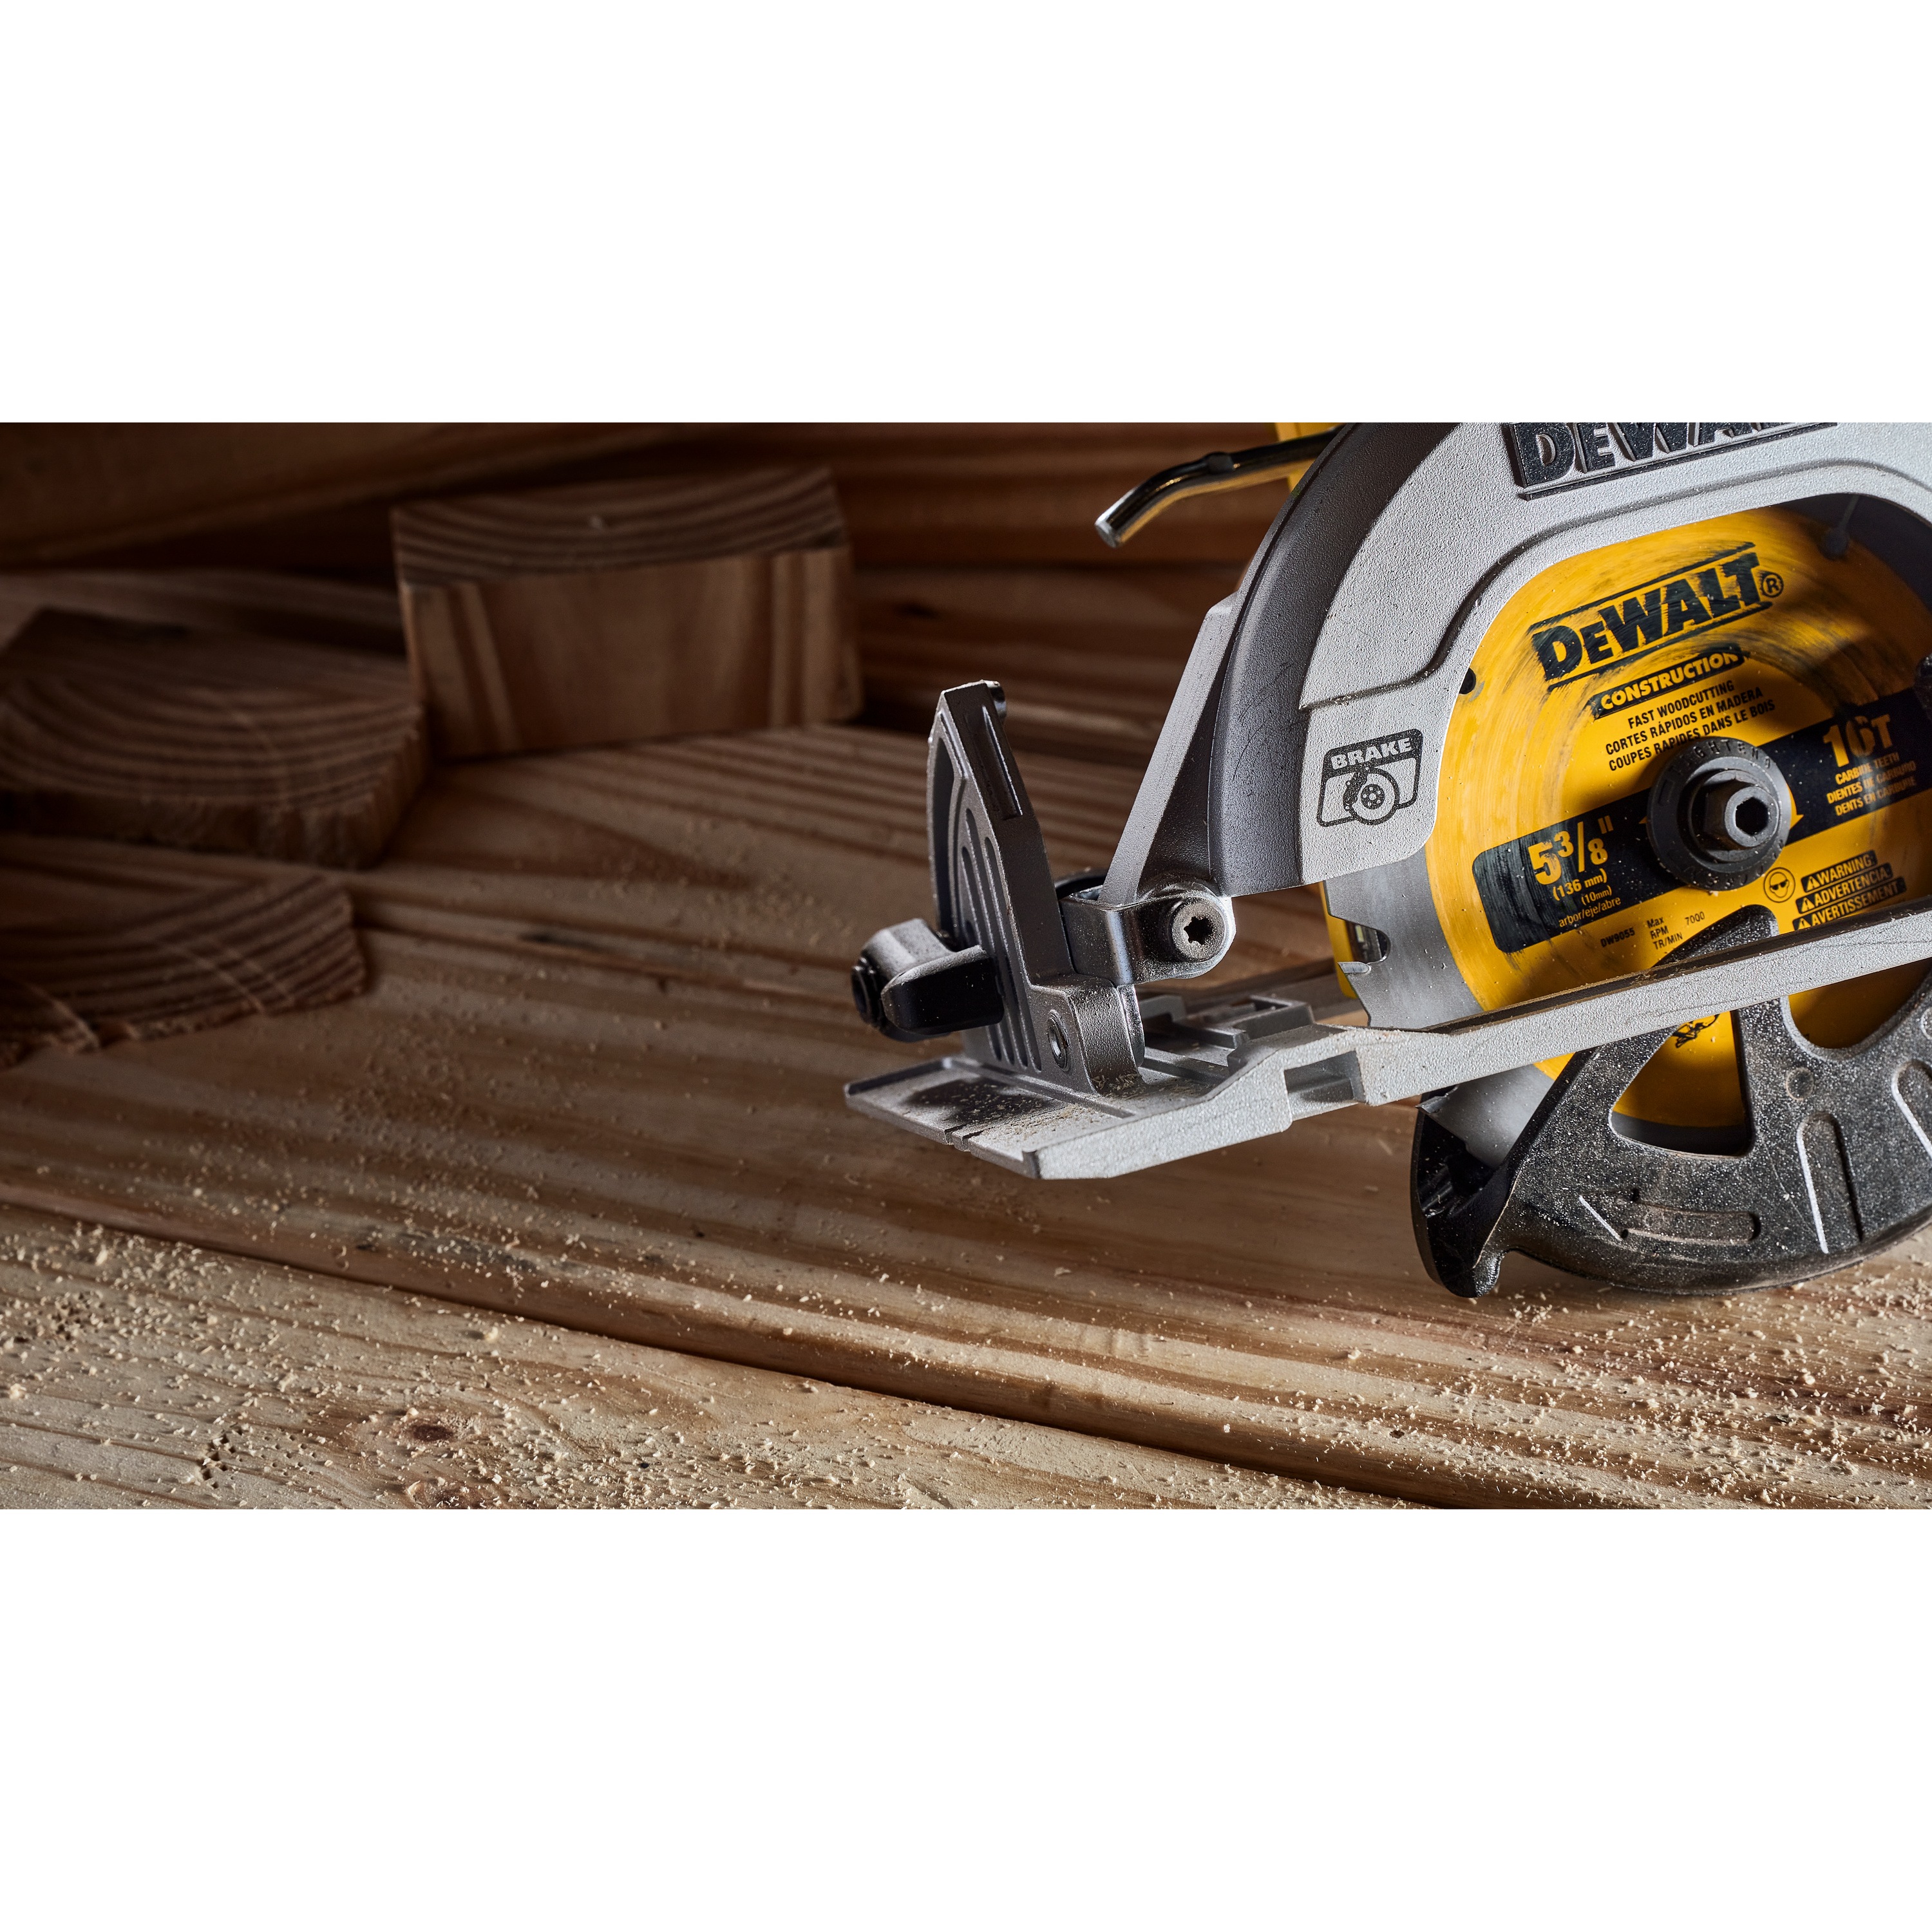 Adjustable bevel capacity feature of xtreme 12 volt 5 and three eighths inch brushless cordless circular saw tool.